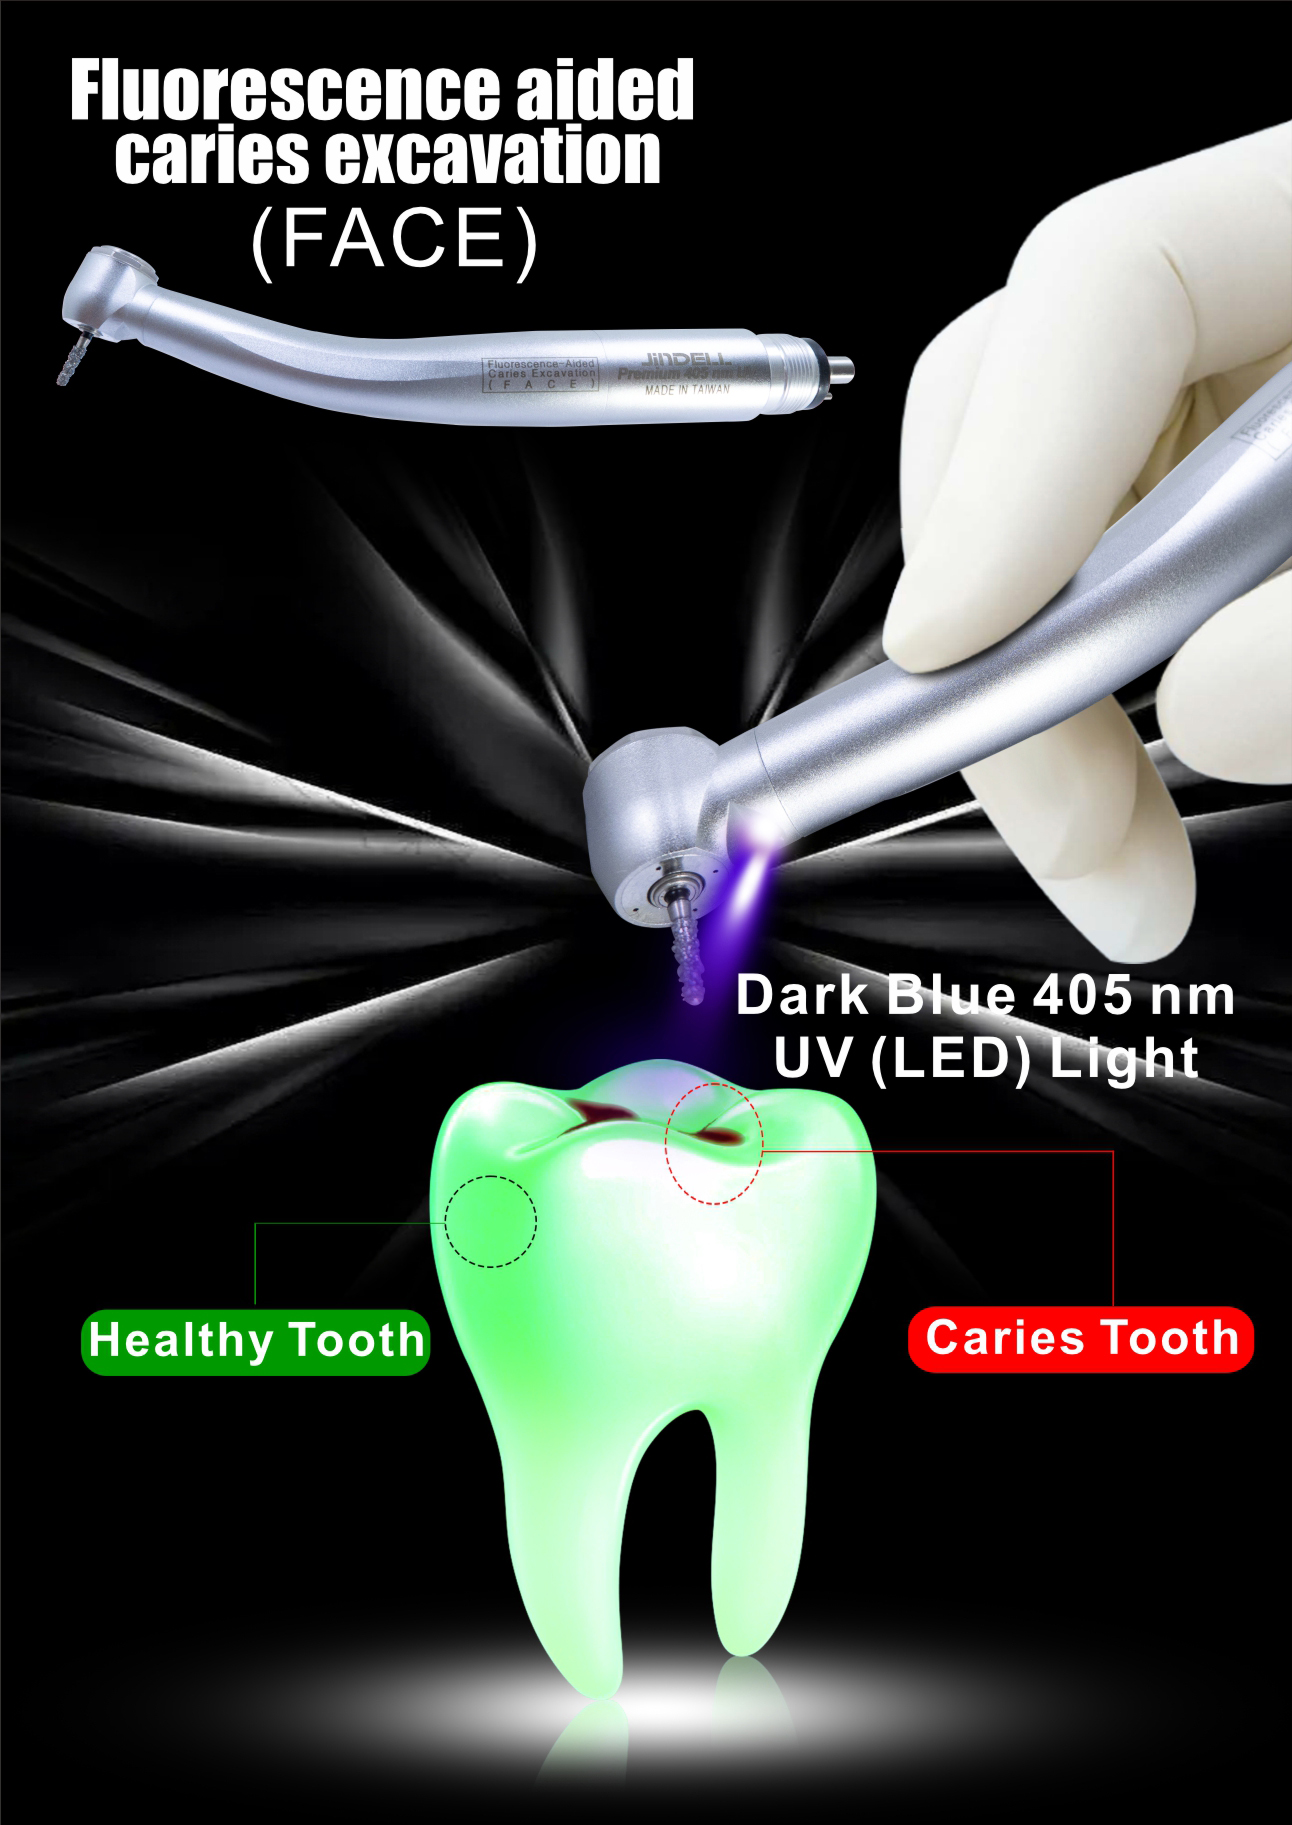 Fluorescence aided caries excavation (FACE) Turbines